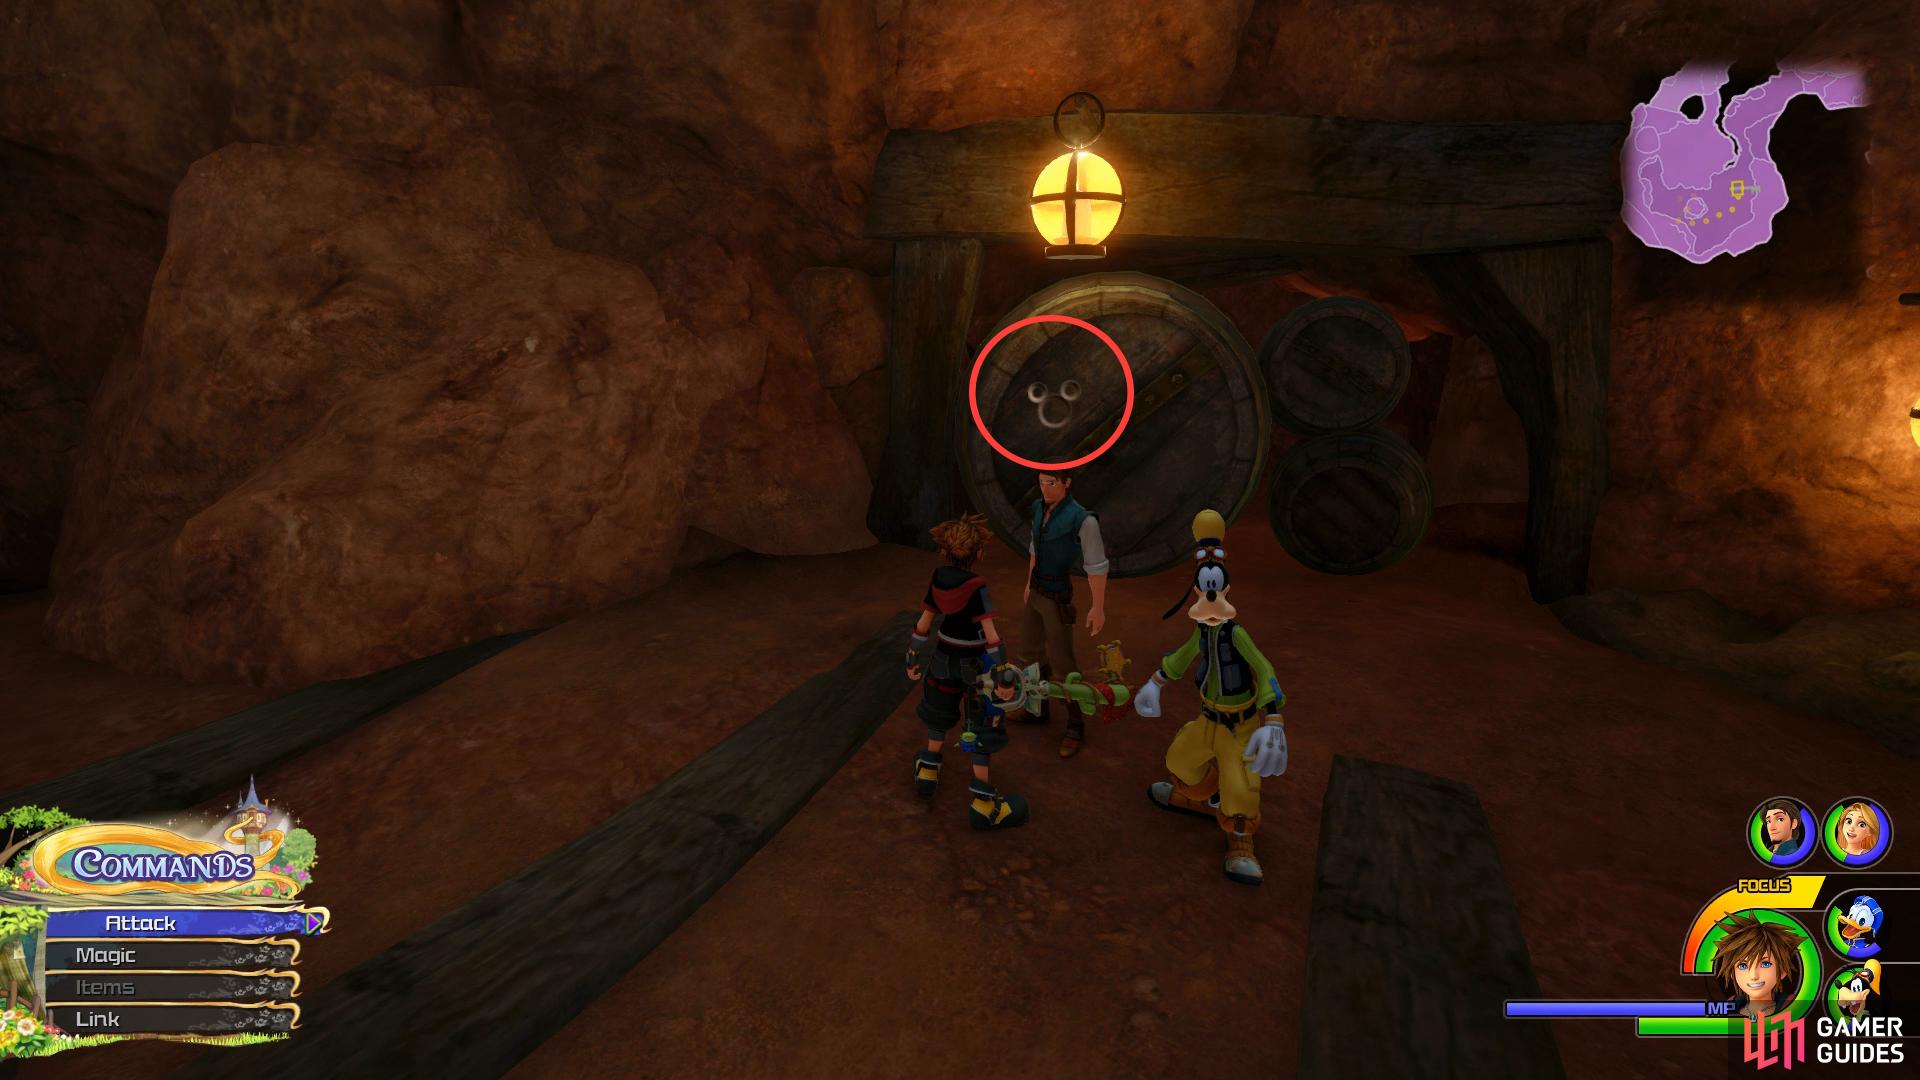 Search the bottom of the cave for this Lucky Emblem.